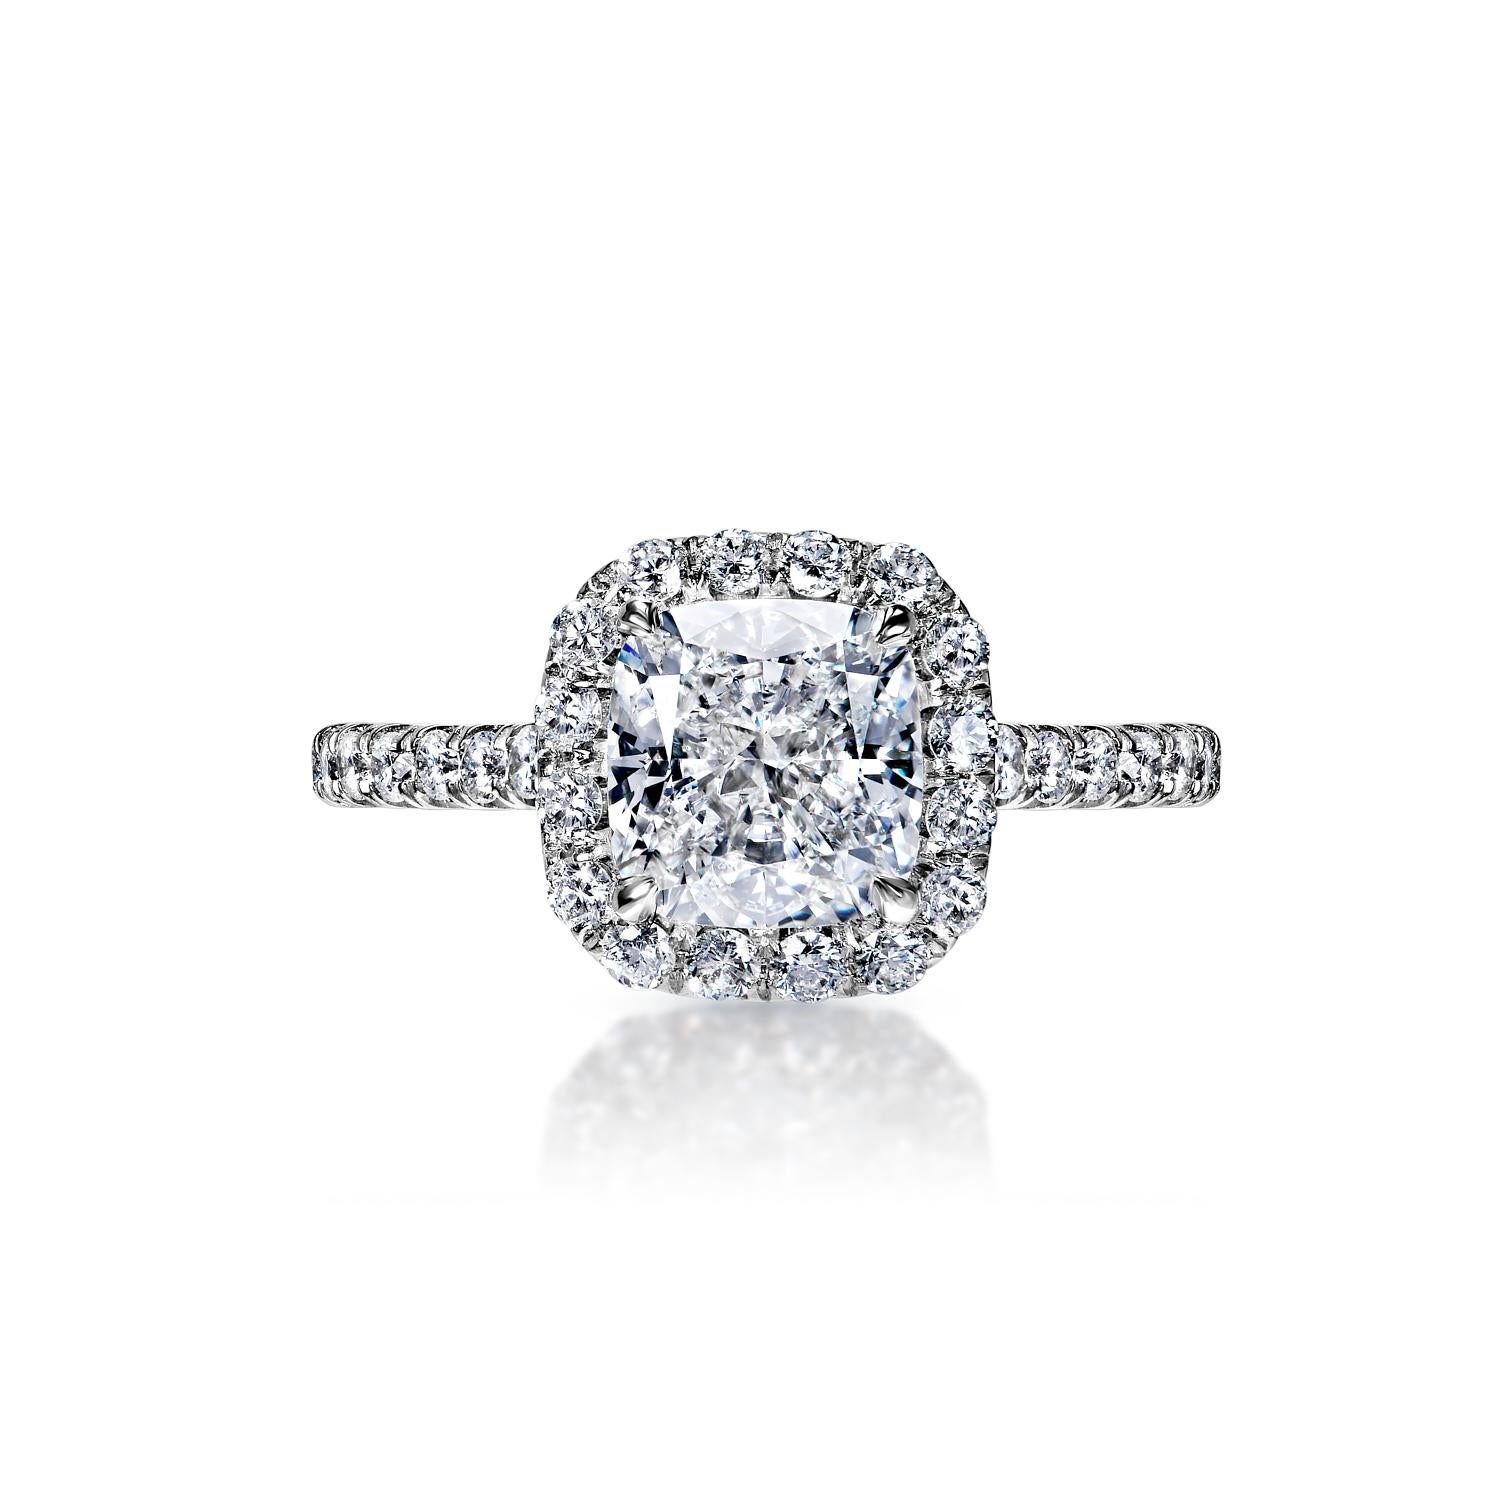 Mallory 3 Carat E VS2 Cushion Cut Diamond Engagement Ring in Platinum By Mike Nekta

GIA CERTIFIED
Center Diamond:

Carat Weight: 2.01 Carats 
Color : E
Clarity: VS2
Style: Cushion Cut

Ring:
Metal: Platinum
Setting: Halo, Sidestone, French V